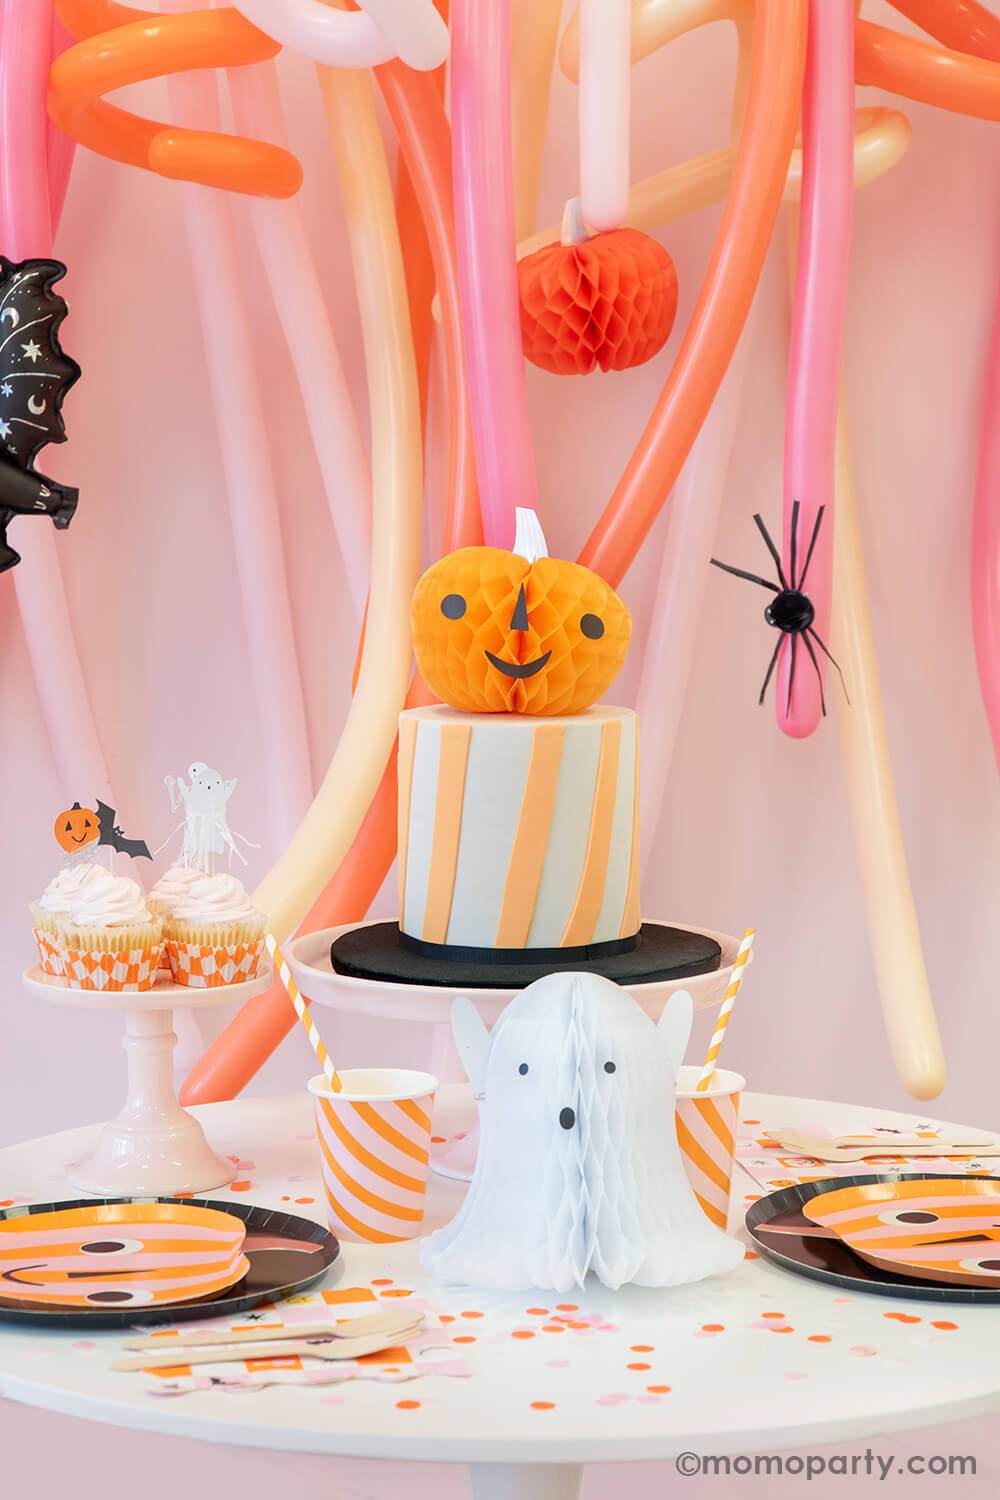 Momo Party's Trick or Treat Pink Halloween box set up featuring a festive long balloon backdrop with curling long balloons in coral, pink, rose and peach colors. On the balloon backdrop it's decorated with paper pumpkin honeycombs and a mini bat foil balloon. In front of the balloons, a small round table is filled with Halloween party supplies including pumpkin shaped plates, a bat garland, ghost and pumpkin honeycomb decorations from momoparty.com.